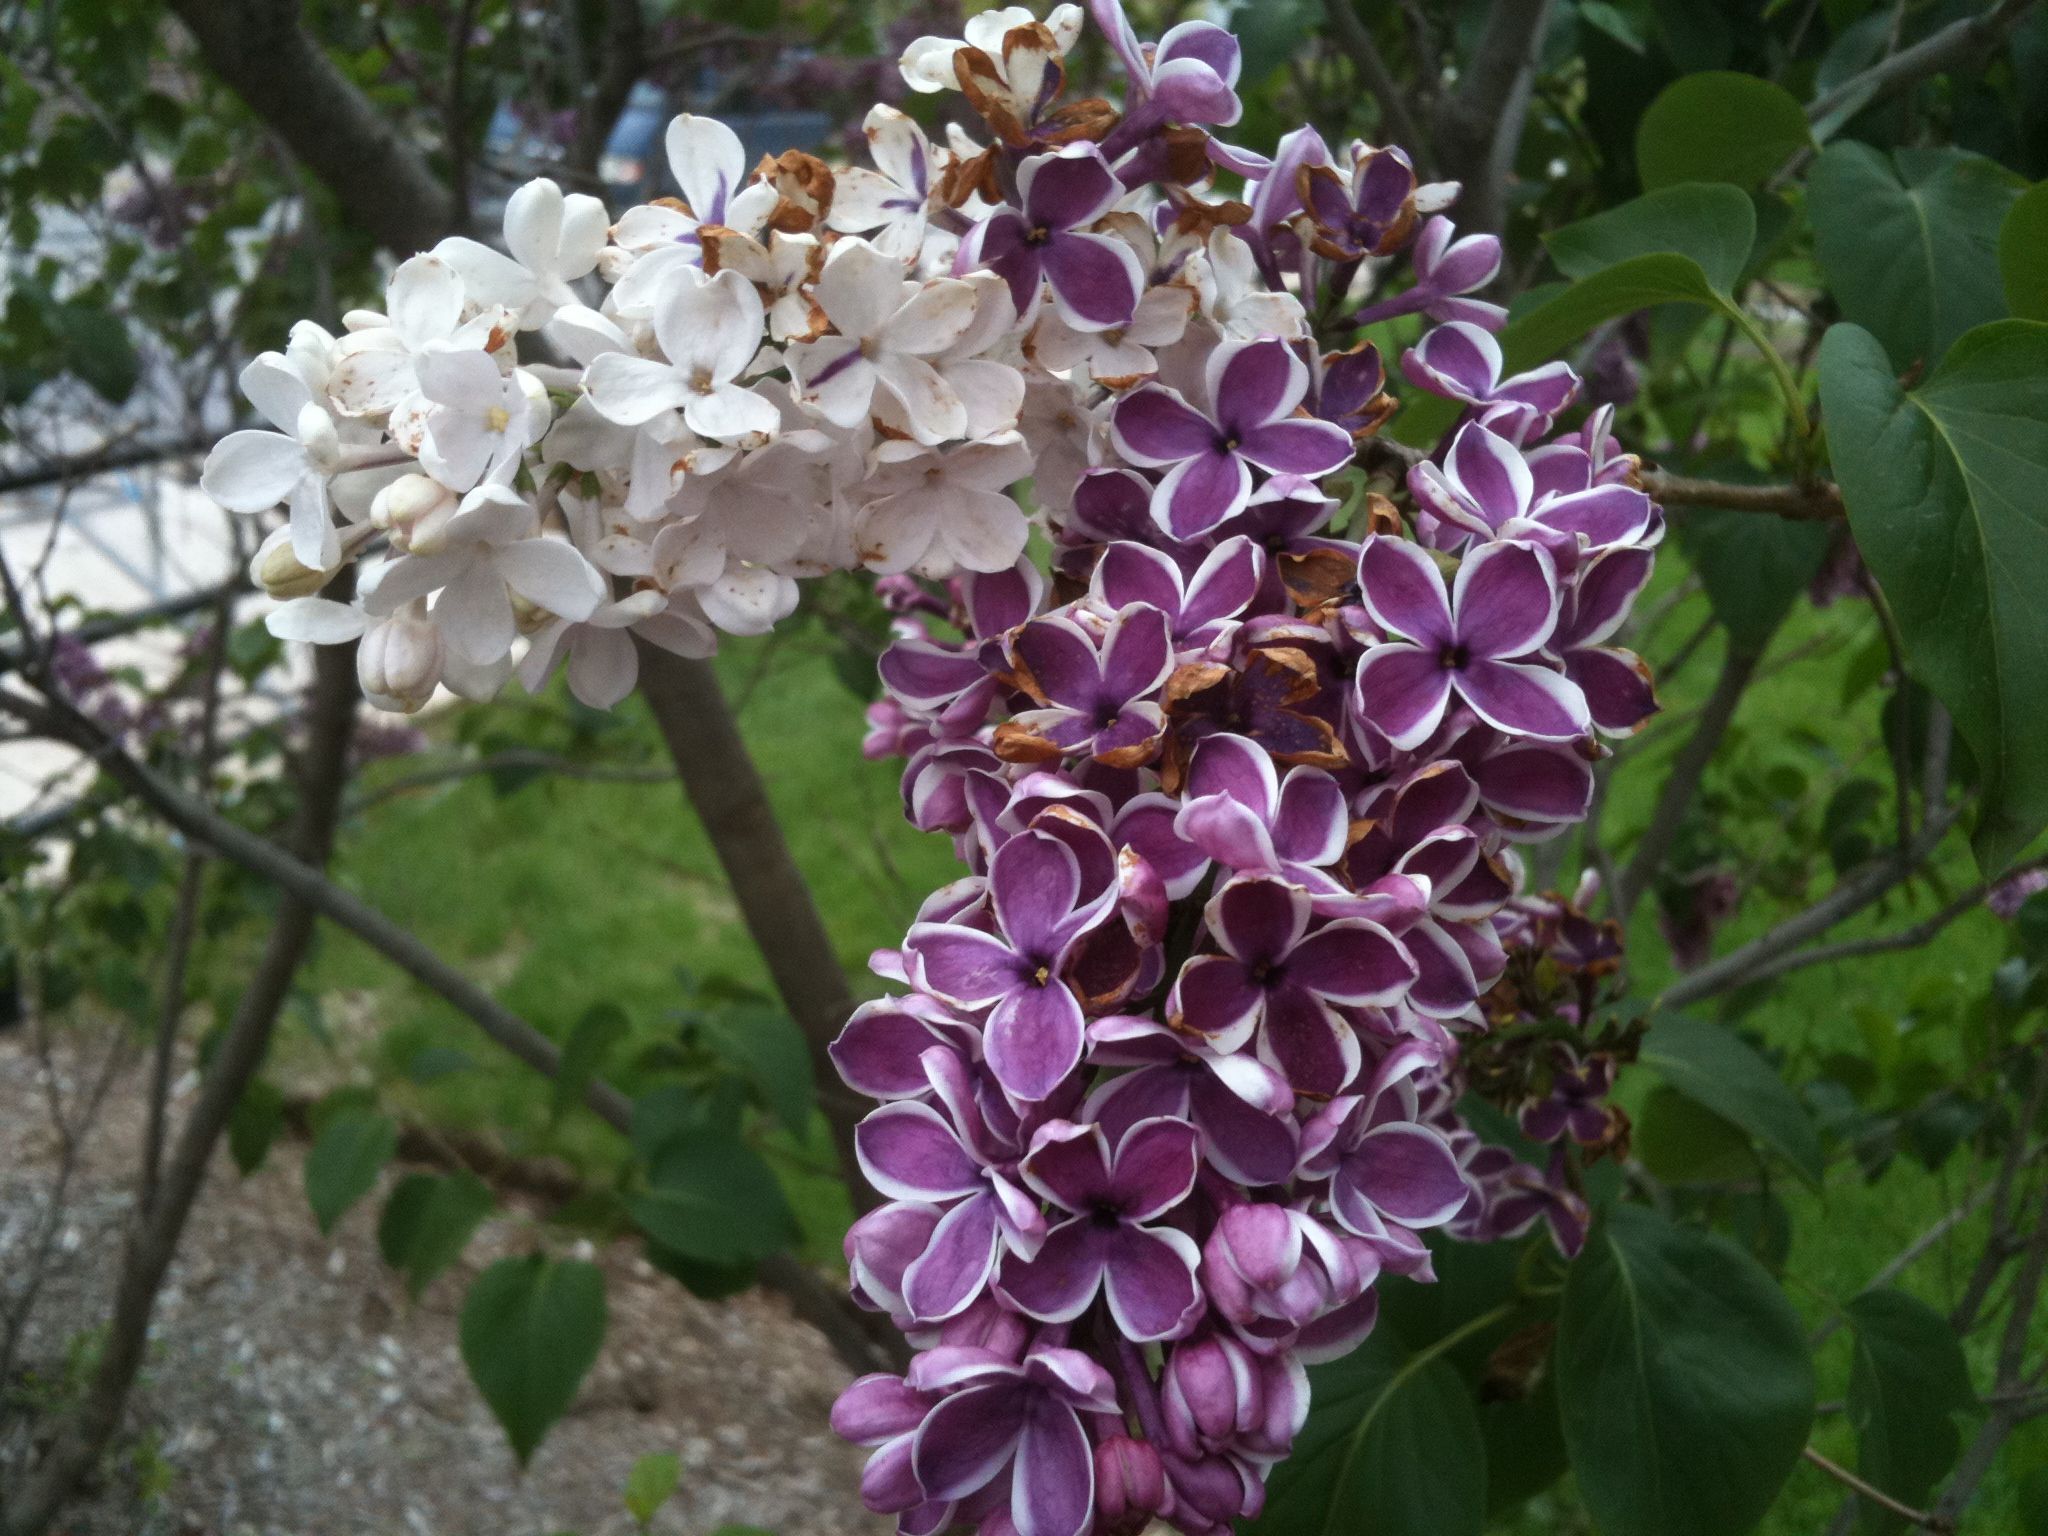 Her 'Sensation' lilac looks different this year. Enjoy! - Indiana Yard and  Garden - Purdue Consumer HorticulturePurdue University Indiana Yard and  Garden – Purdue Consumer Horticulture